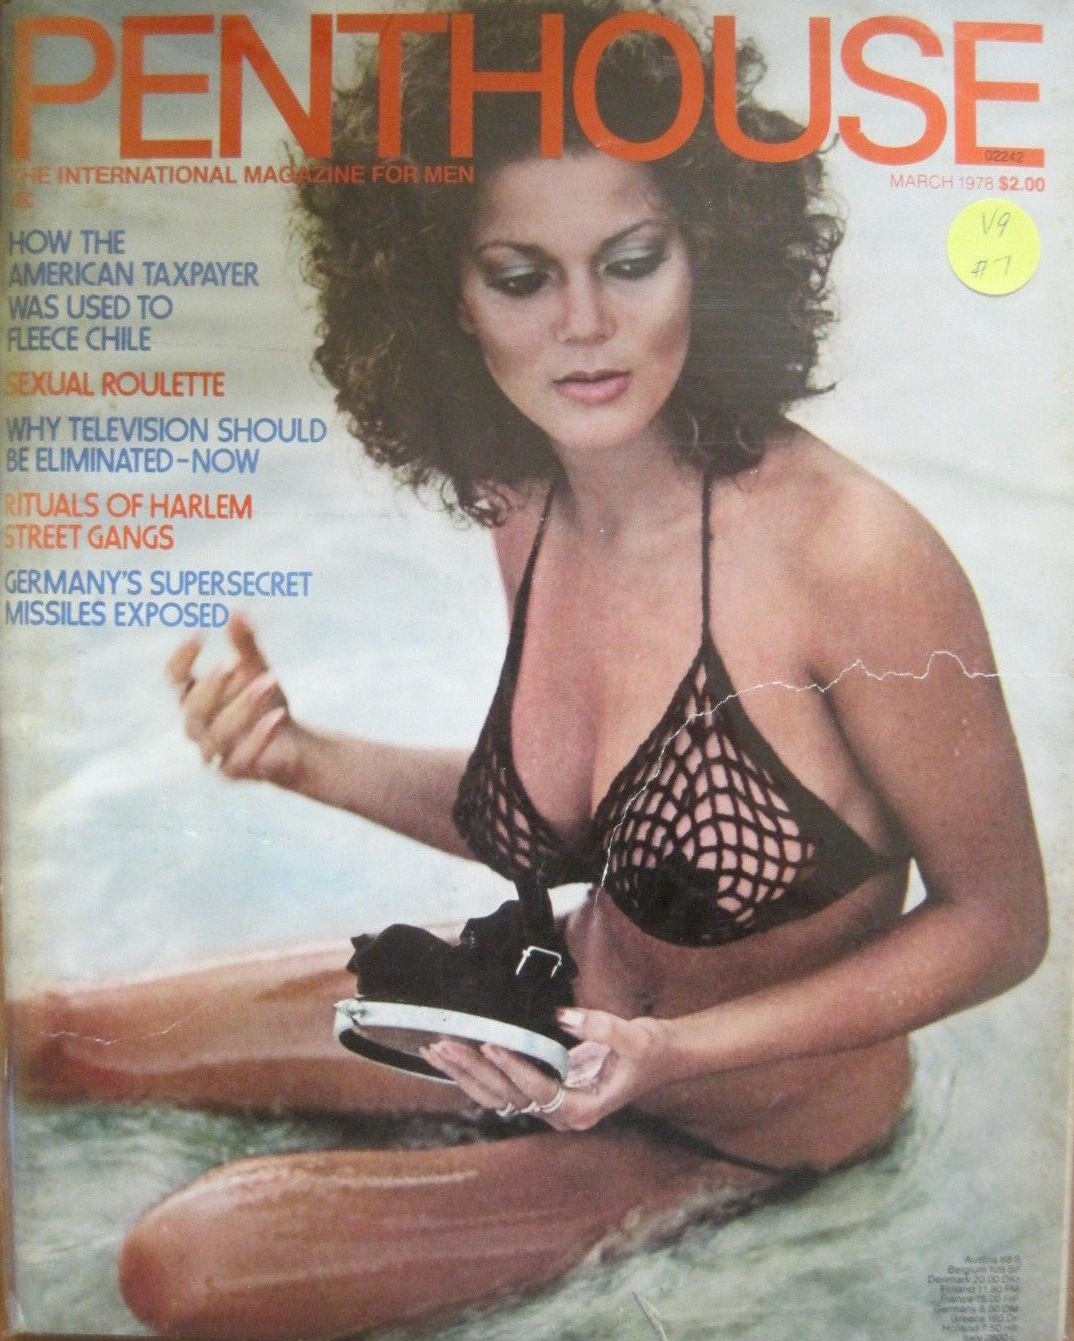 Penthouse UK Vol. 9 # 7 magazine back issue Penthouse UK magizine back copy Penthouse UK Vol. 9 # 7 Magazine Back Issue Published by Penthouse Publishing, Bob Guccione. How The American Taxpayer Was Used To Fleece Chile.